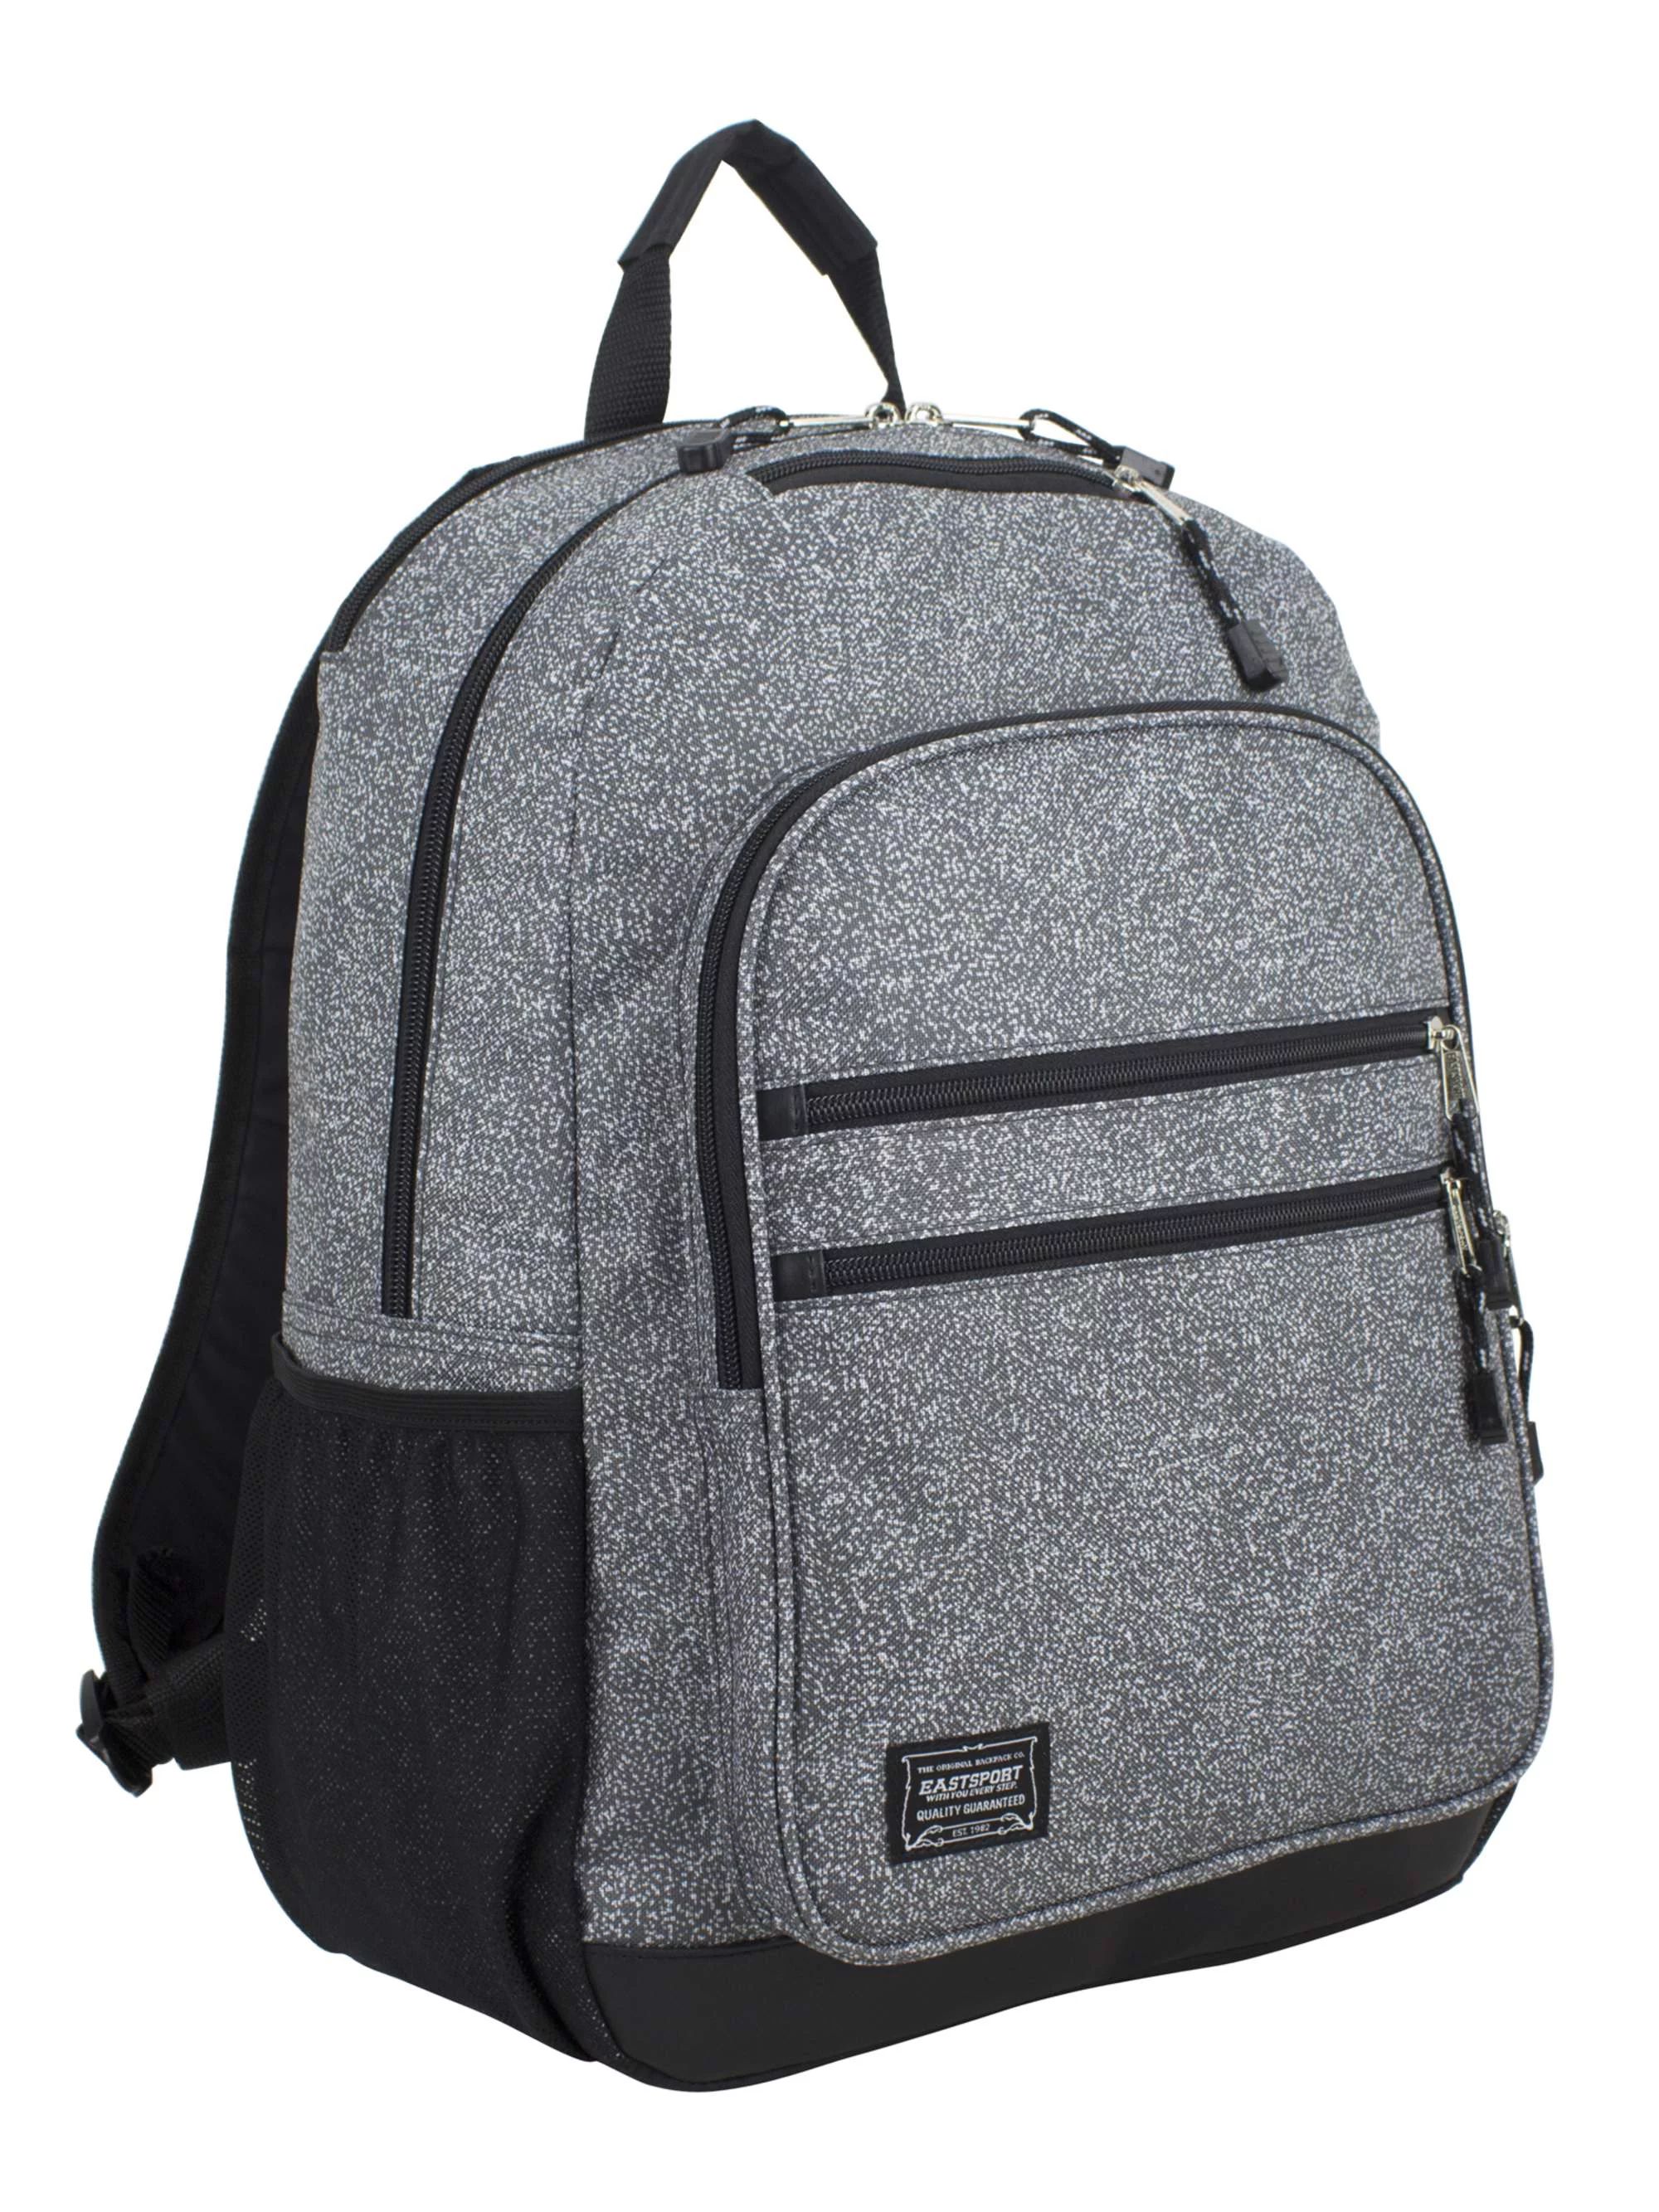 Eastsport New Future Tech Backpack with Padded Electronic Storage Pocket | Walmart (US)